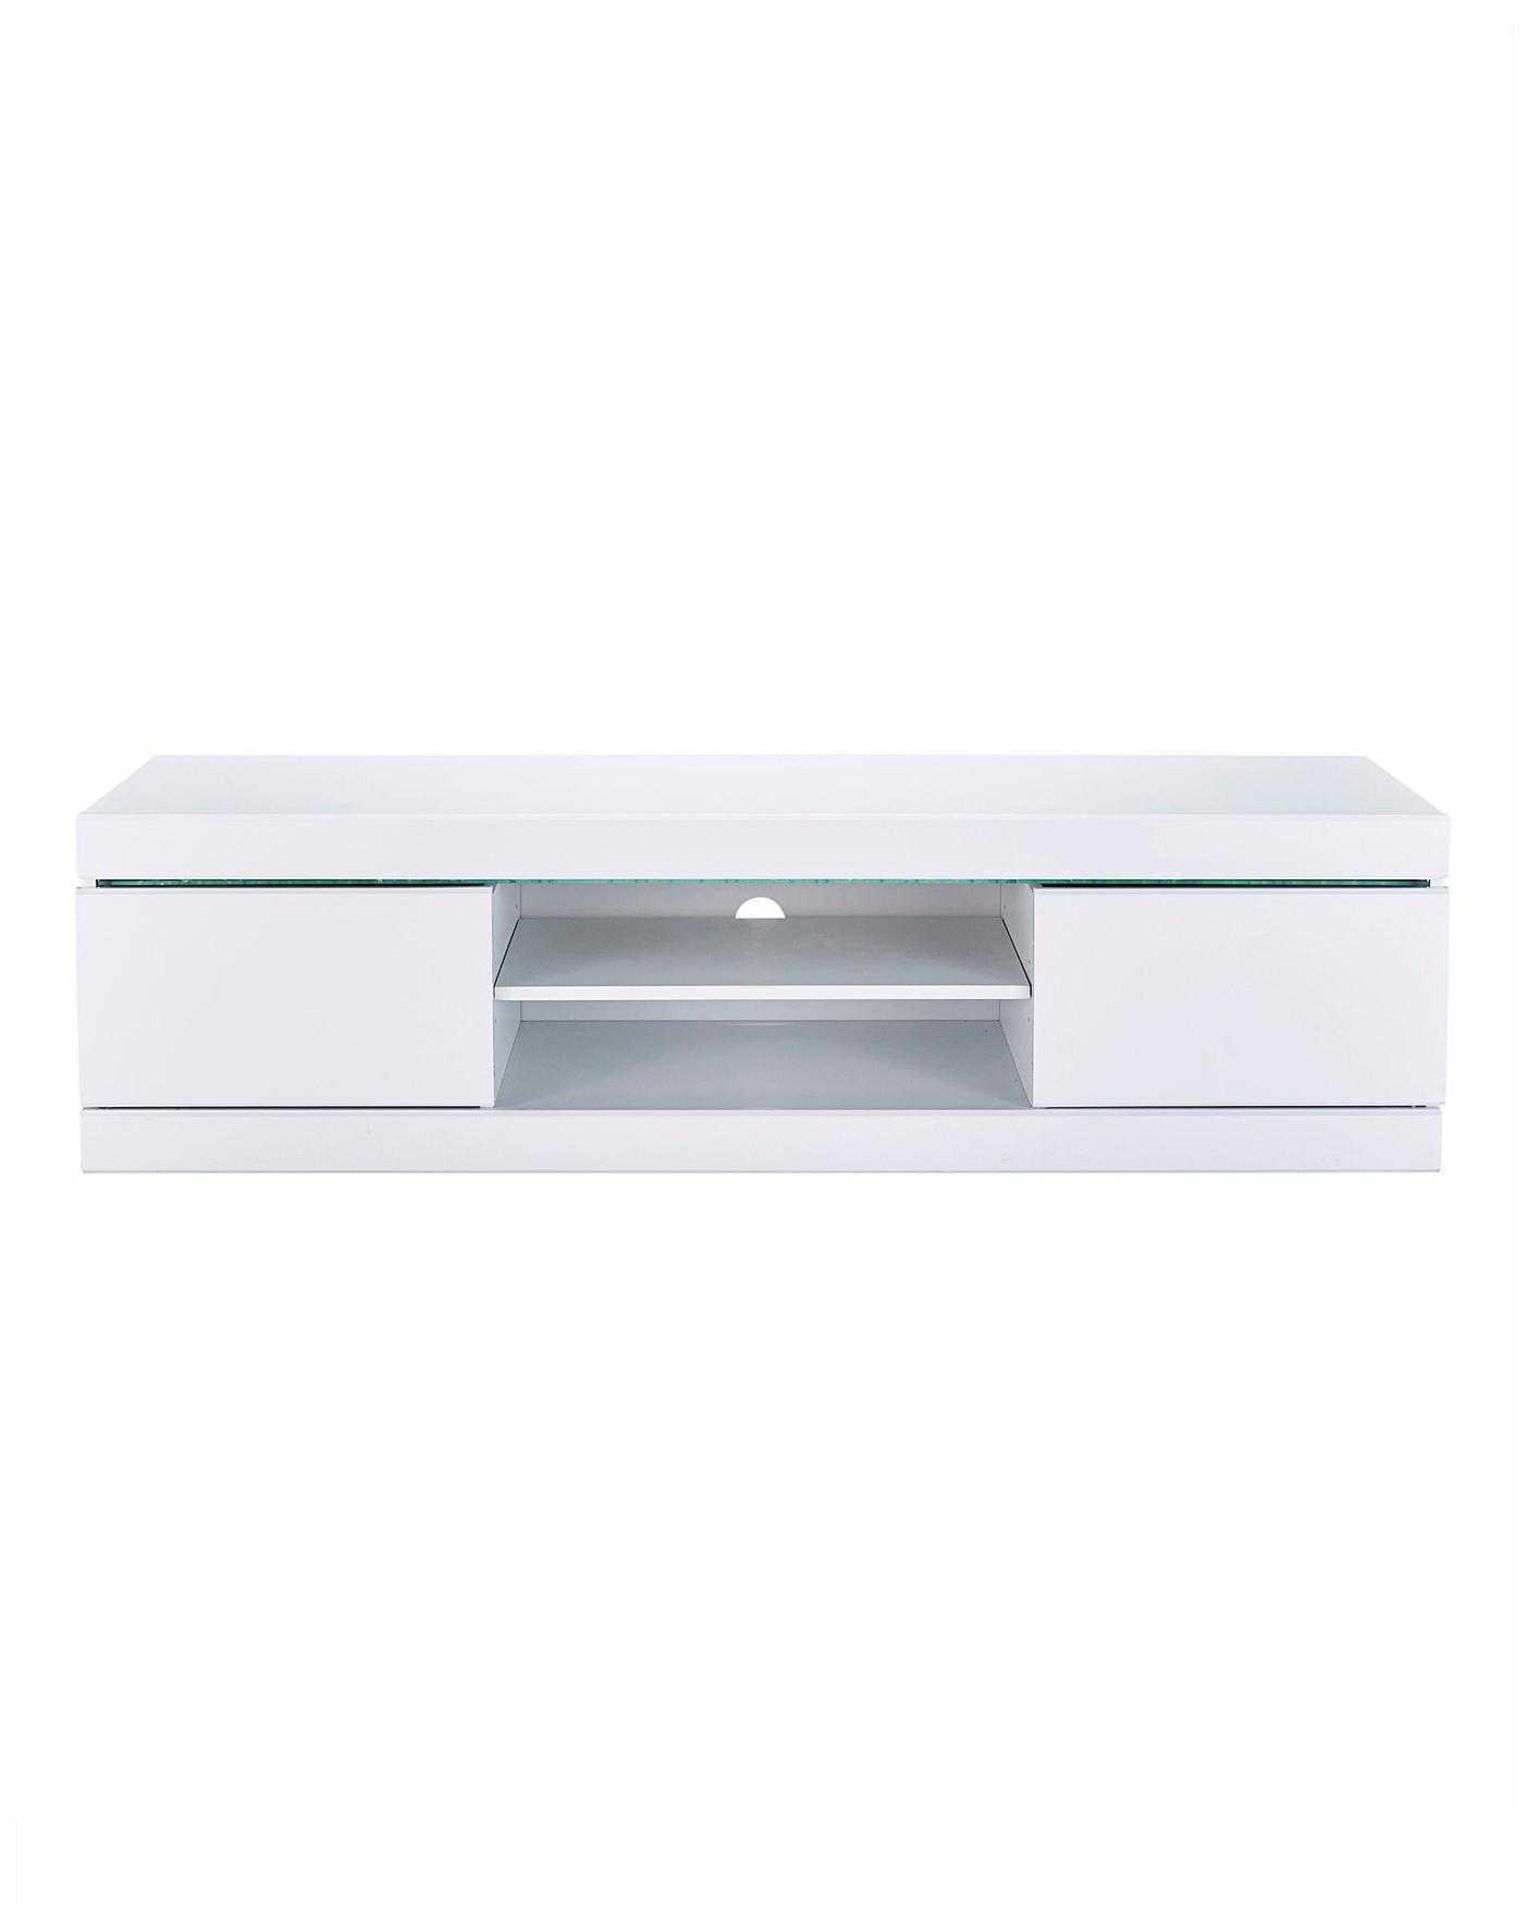 RRP £200 - New Boxed 'Shark-Media' Television Unit In White High Gloss (Appraisals Available On